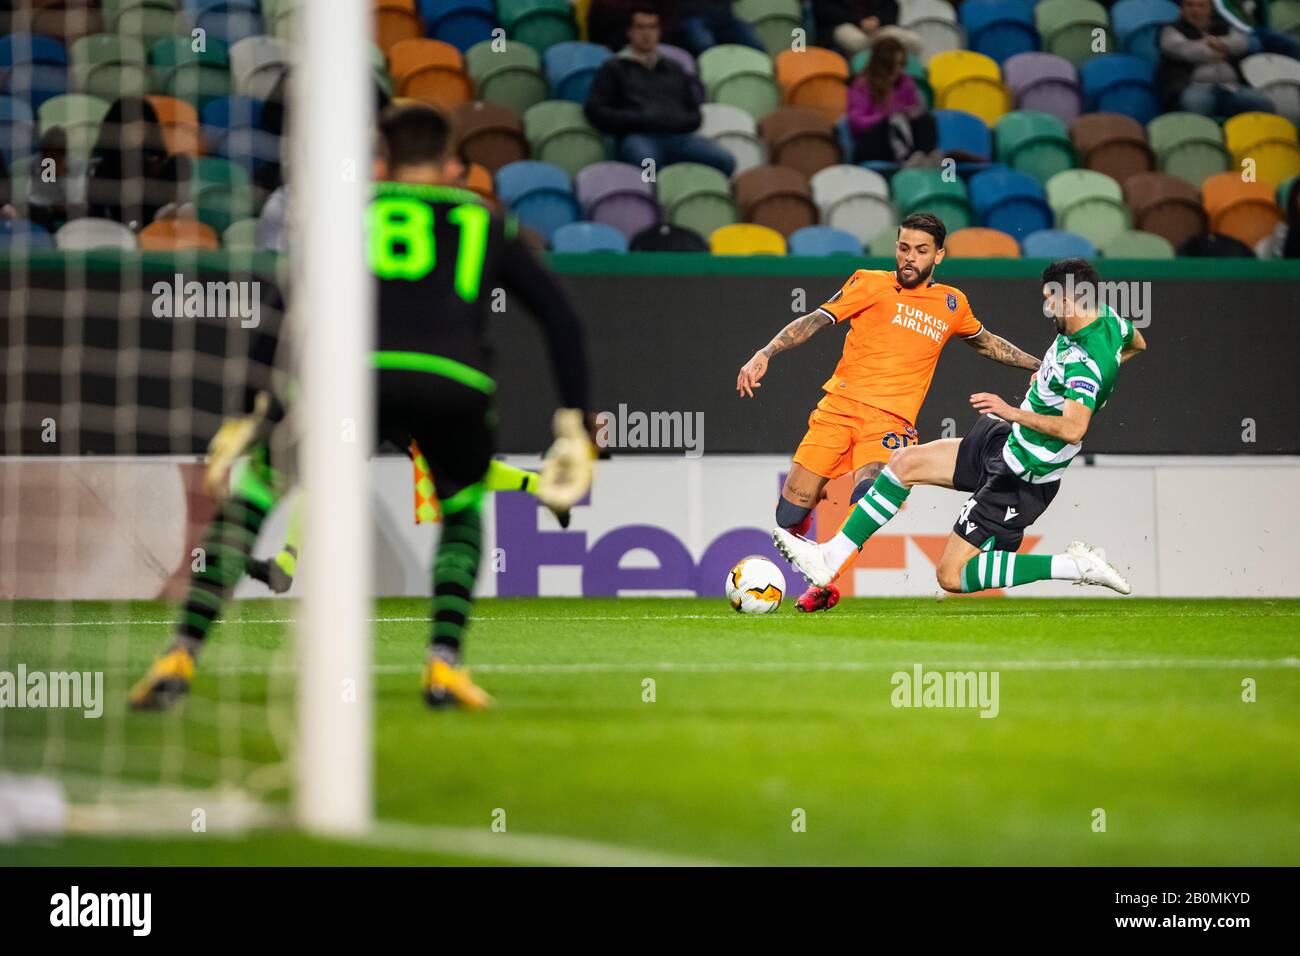 Junior Caicara of Istanbul Basaksehir and Luis Neto of Sporting CP are seen in action during the UEFA Europa League 1st leg of Round of 32 match between Sporting CP and Istanbul Basaksehir at Jose Alvalade Stadium in Lisbon.(Final score; Sporting CP 3:1 Istanbul Basaksehir) Stock Photo